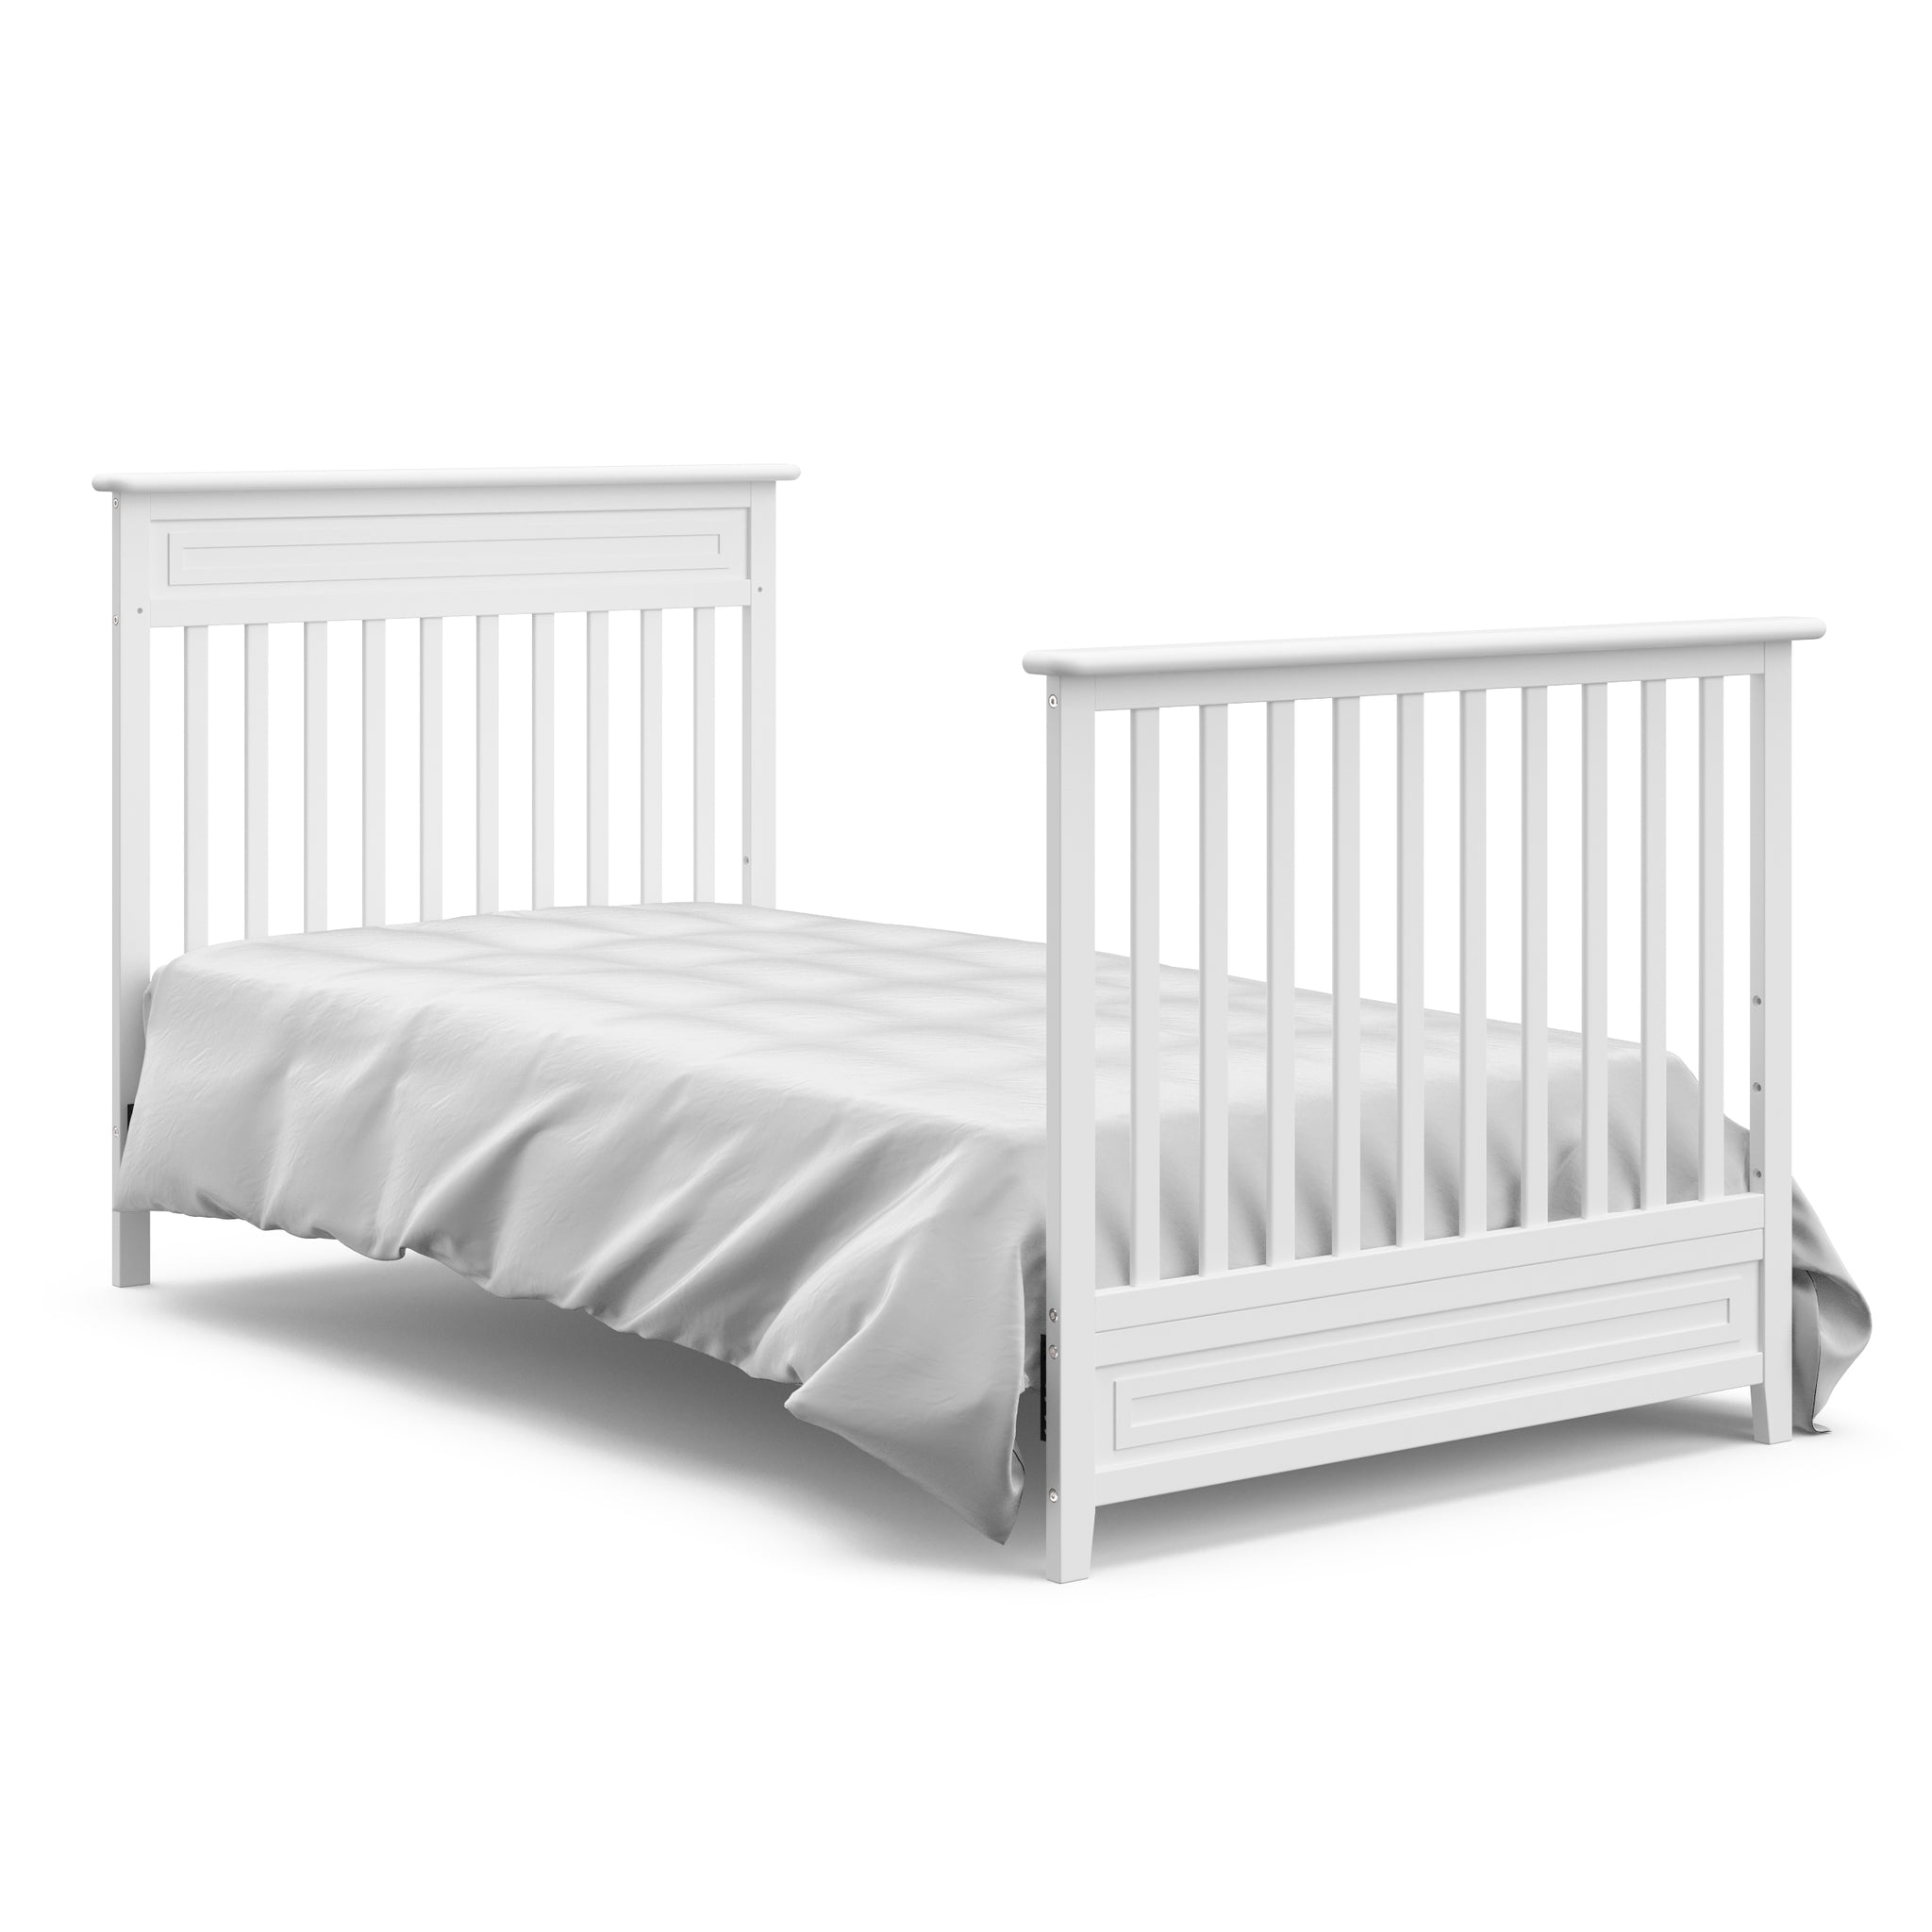 White mini crib in twin-size bed with headboard and footboard conversion 